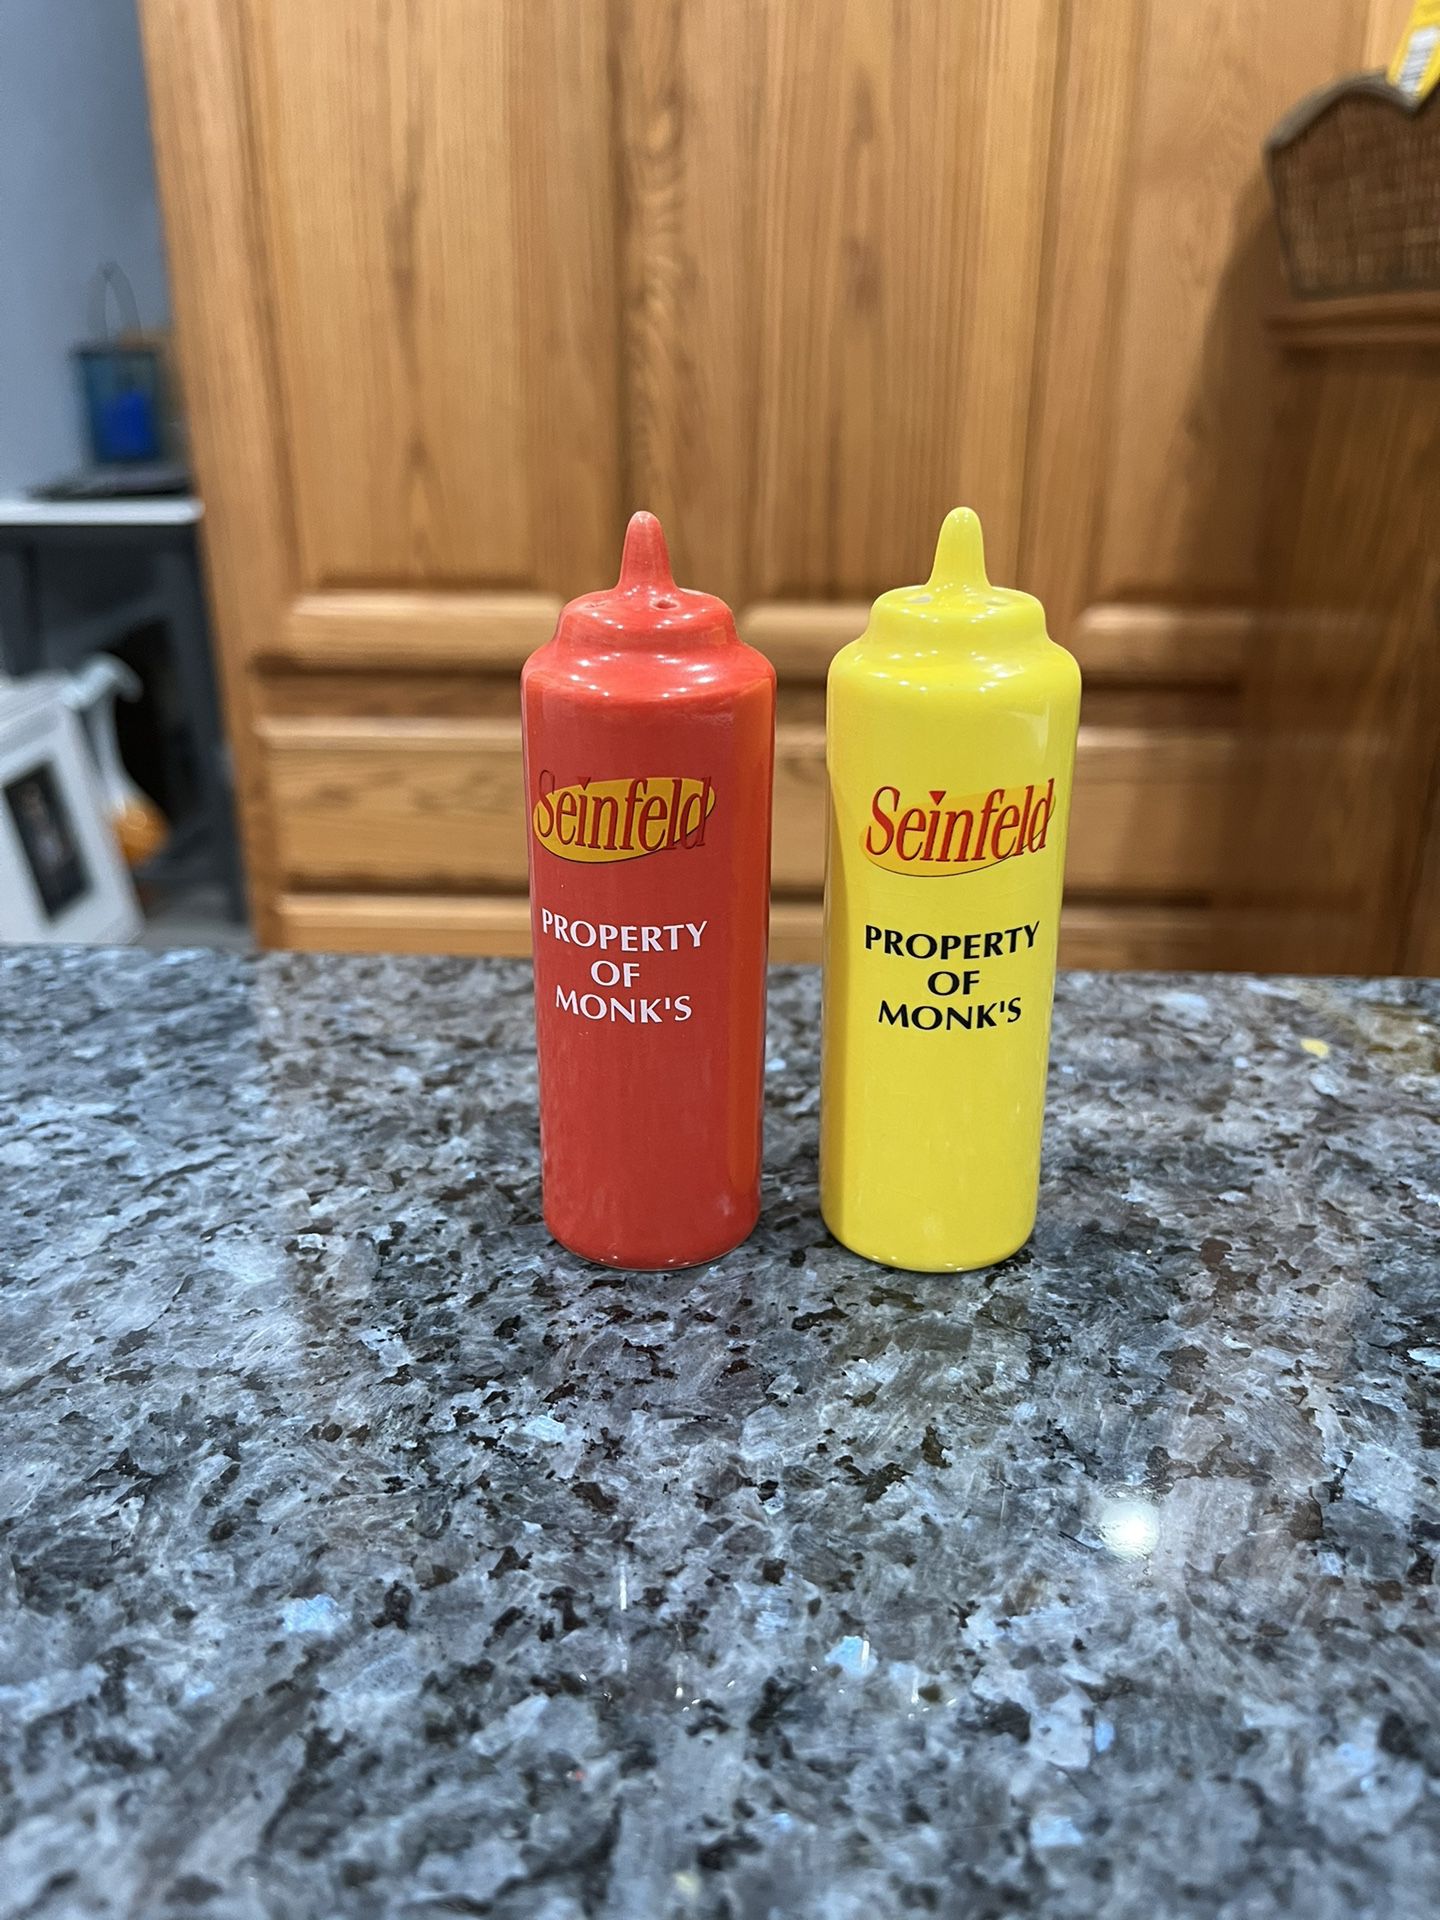 Vintage Seinfeld Ketchup and Mustard Bottle Ceramic Salt and Pepper Shakers 90’s.  Brand New Never Used 